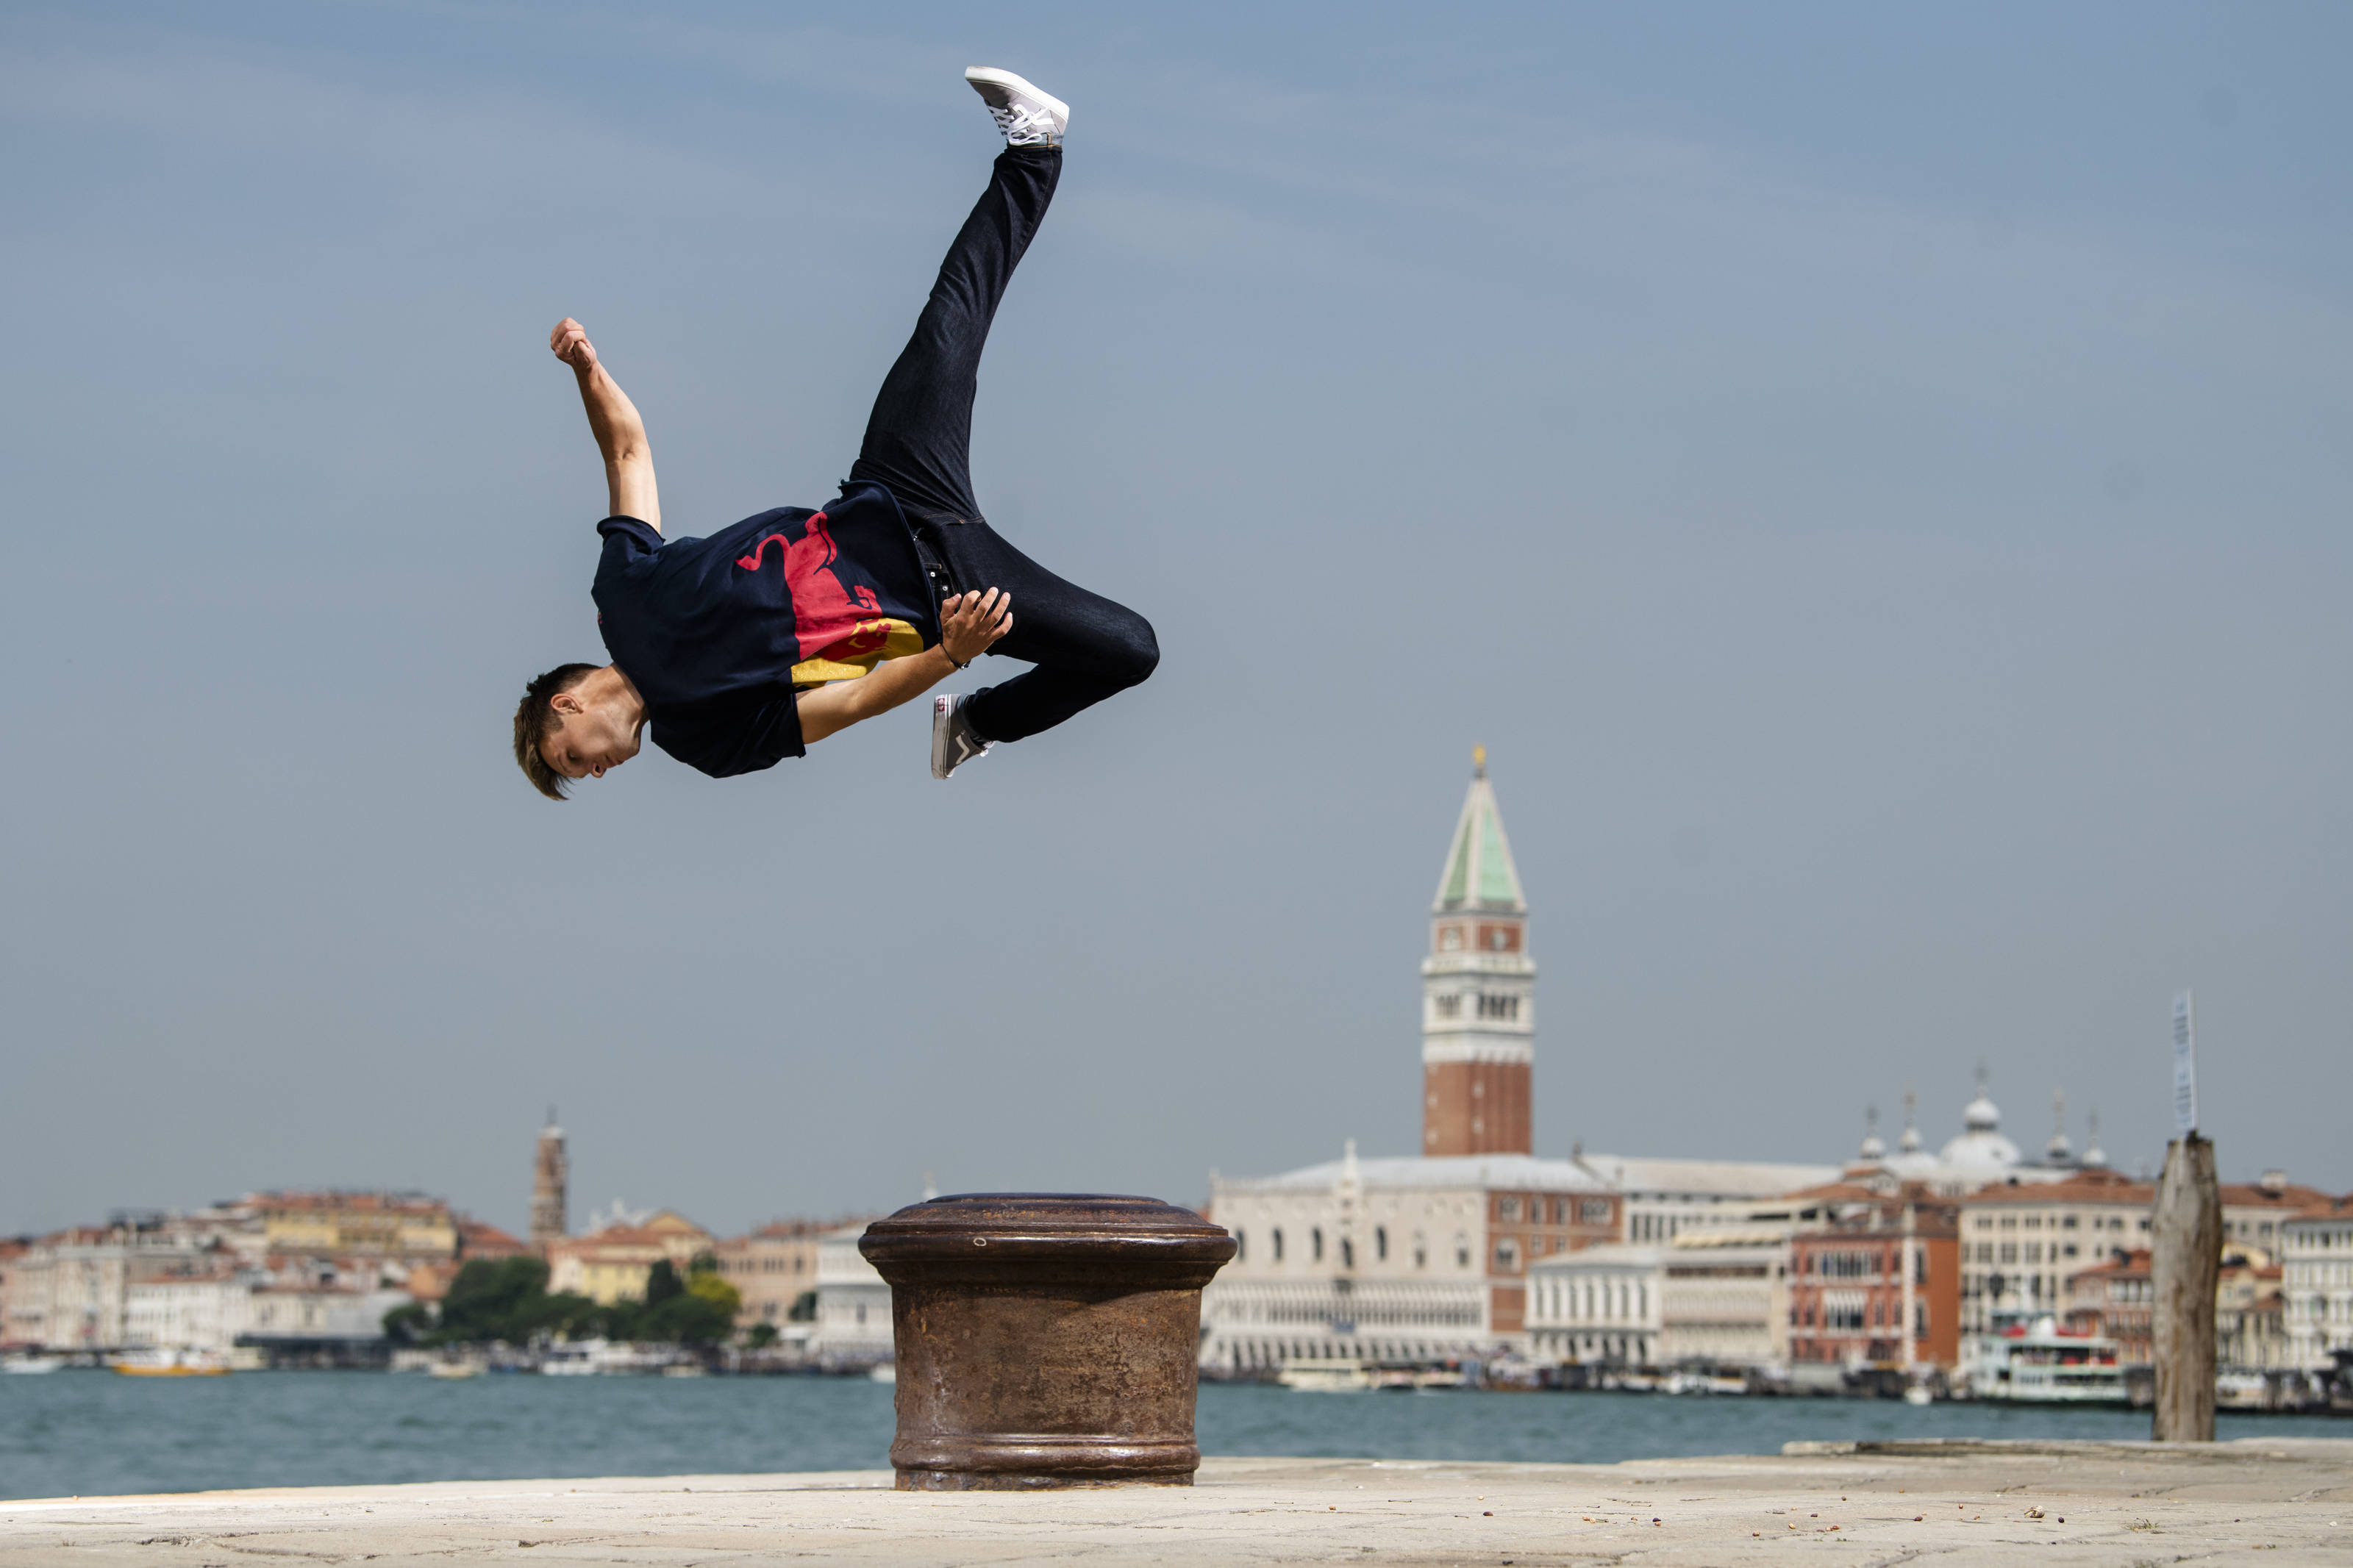 Best Gravity defying images: 5 shots to check out